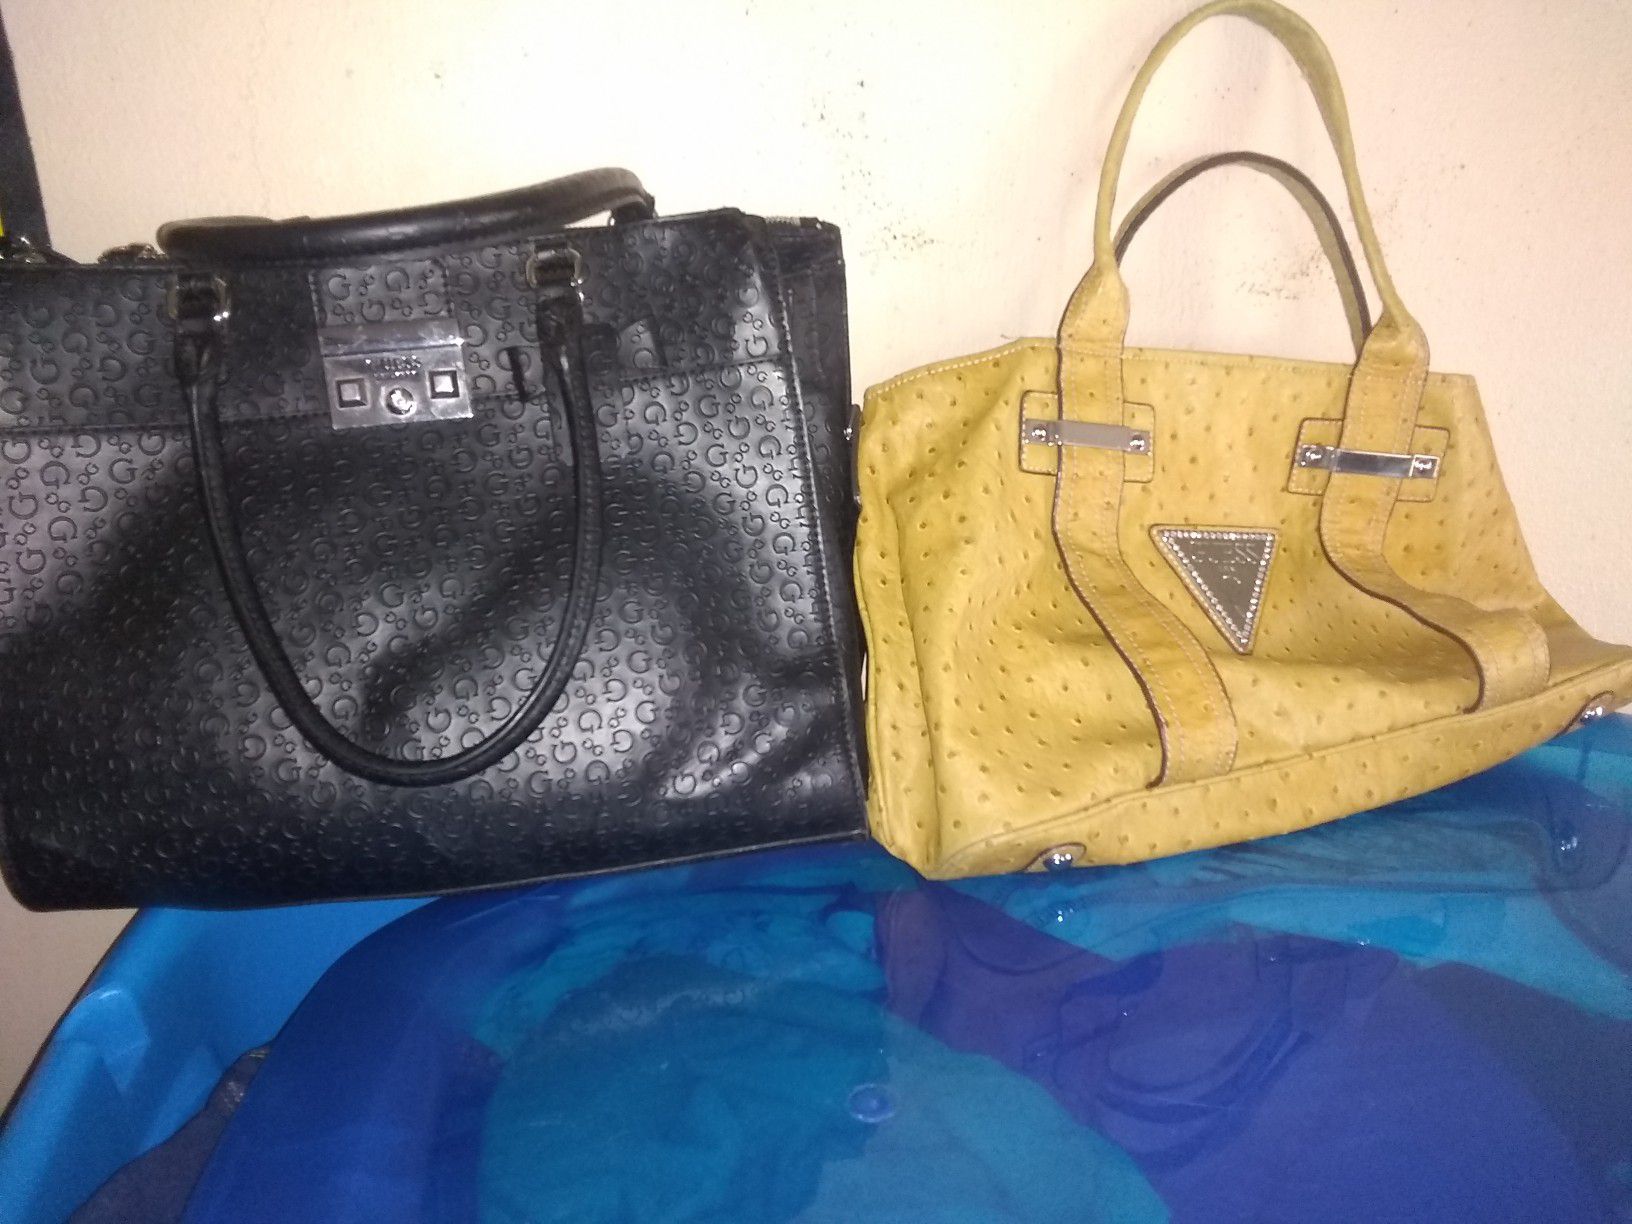 Two Guess Purses for $75